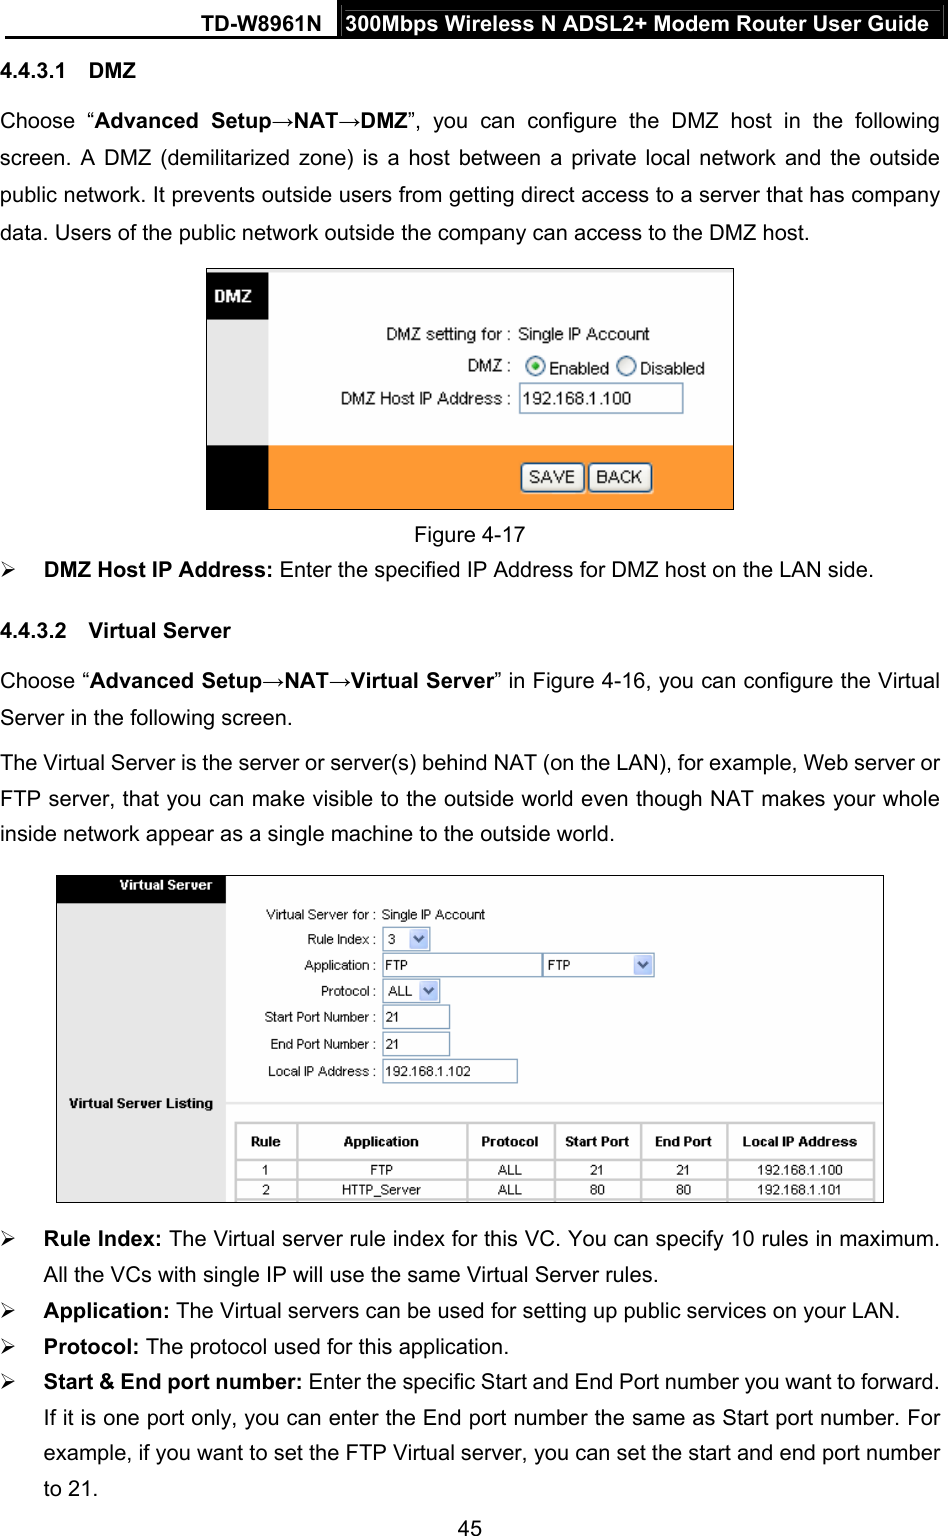 TD-W8961N  300Mbps Wireless N ADSL2+ Modem Router User Guide 45  4.4.3.1  DMZ Choose “Advanced Setup→NAT→DMZ”, you can configure the DMZ host in the following screen. A DMZ (demilitarized zone) is a host between a private local network and the outside public network. It prevents outside users from getting direct access to a server that has company data. Users of the public network outside the company can access to the DMZ host.  Figure 4-17  DMZ Host IP Address: Enter the specified IP Address for DMZ host on the LAN side. 4.4.3.2  Virtual Server Choose “Advanced Setup→NAT→Virtual Server” in Figure 4-16, you can configure the Virtual Server in the following screen.   The Virtual Server is the server or server(s) behind NAT (on the LAN), for example, Web server or FTP server, that you can make visible to the outside world even though NAT makes your whole inside network appear as a single machine to the outside world.   Rule Index: The Virtual server rule index for this VC. You can specify 10 rules in maximum. All the VCs with single IP will use the same Virtual Server rules.  Application: The Virtual servers can be used for setting up public services on your LAN.  Protocol: The protocol used for this application.  Start &amp; End port number: Enter the specific Start and End Port number you want to forward. If it is one port only, you can enter the End port number the same as Start port number. For example, if you want to set the FTP Virtual server, you can set the start and end port number to 21. 